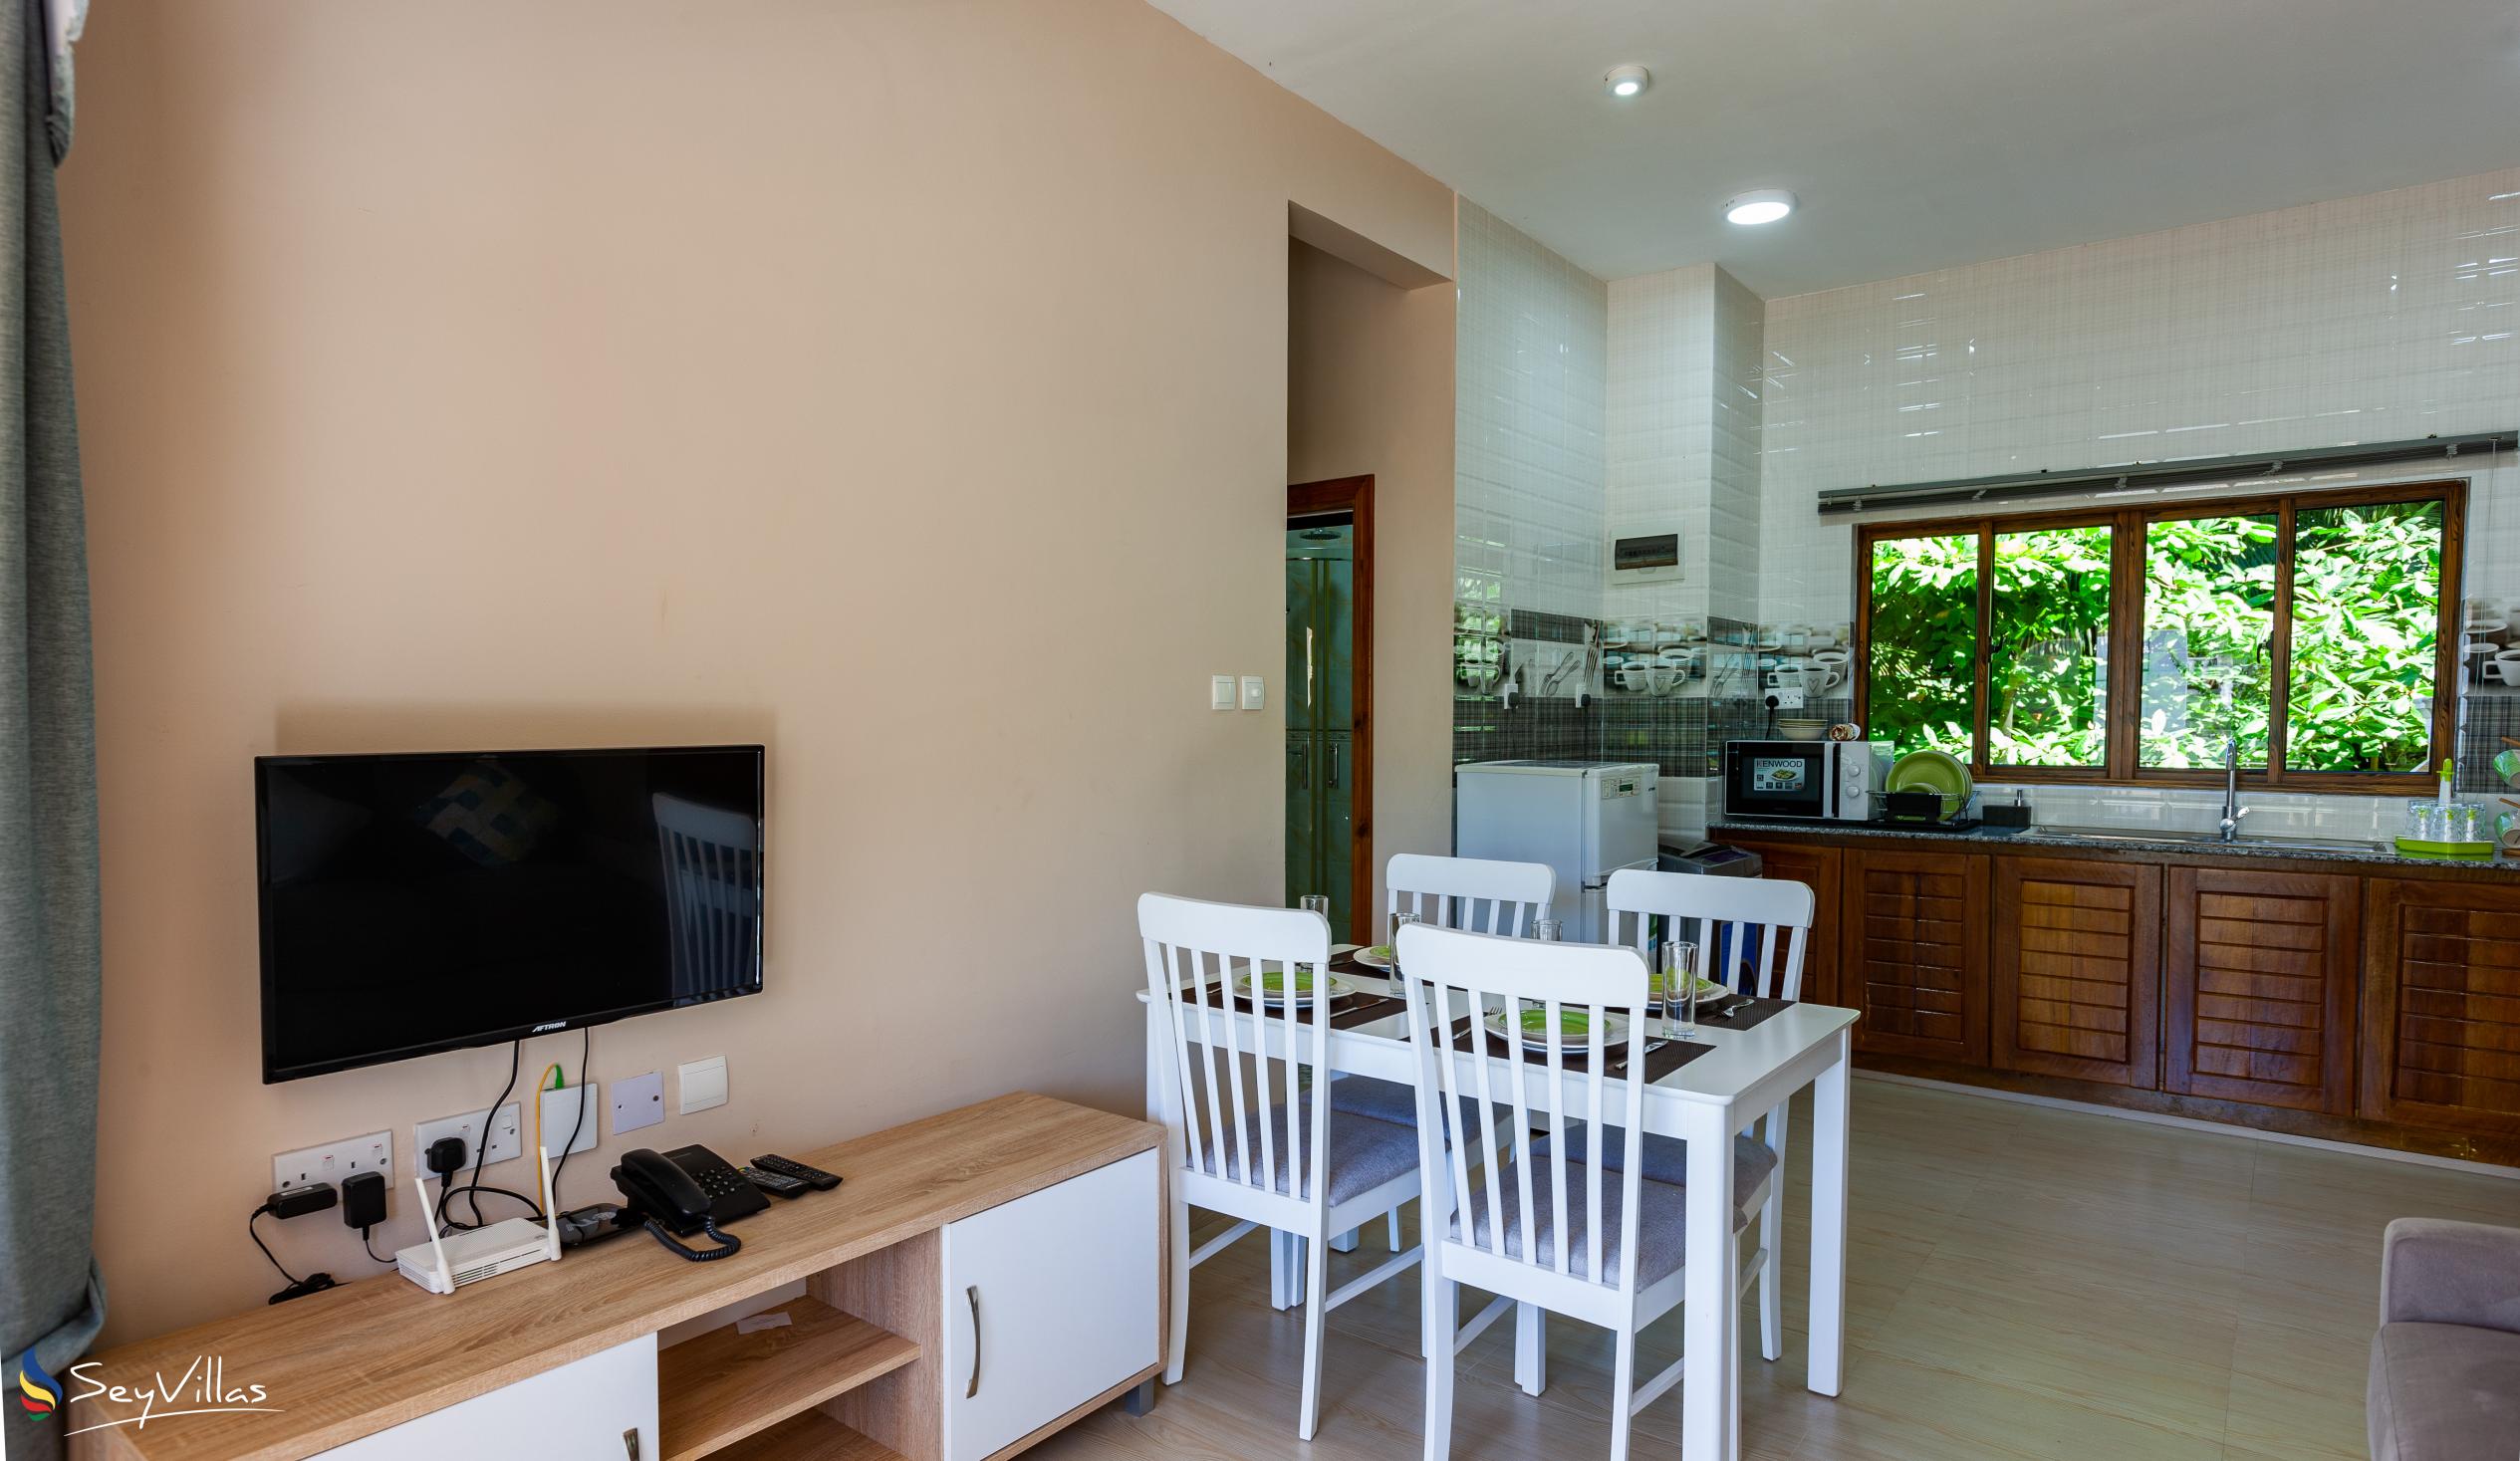 Foto 47: Stone Self Catering Apartments - Appartement 2 chambres - Praslin (Seychelles)